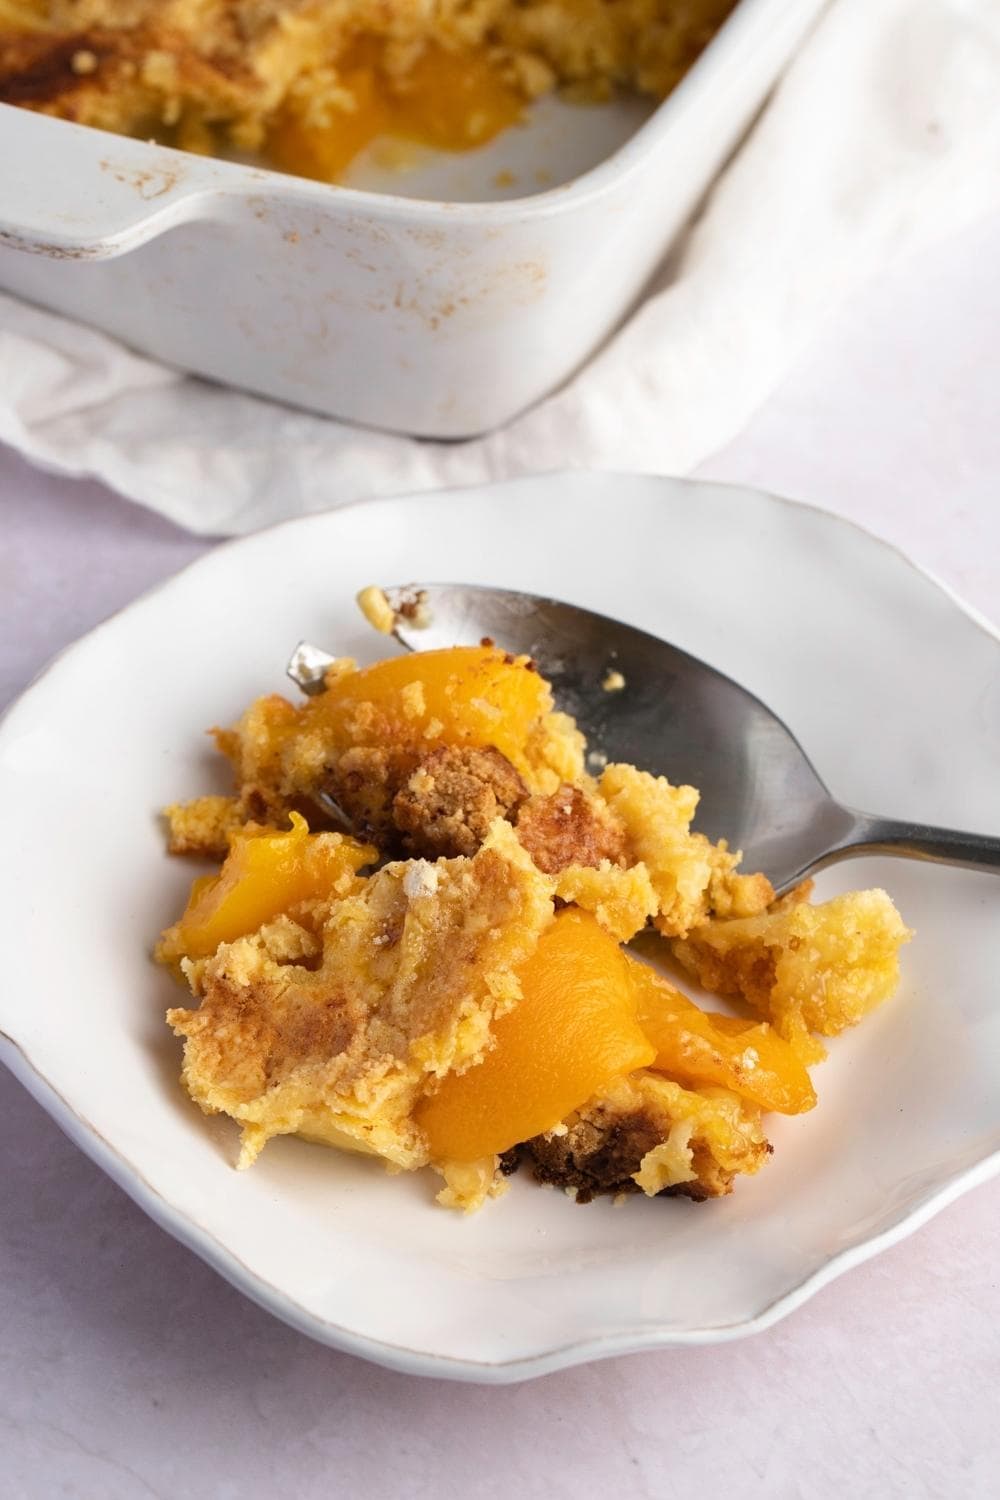 A Slice of Peach Dump Cake on a White Small Plate
